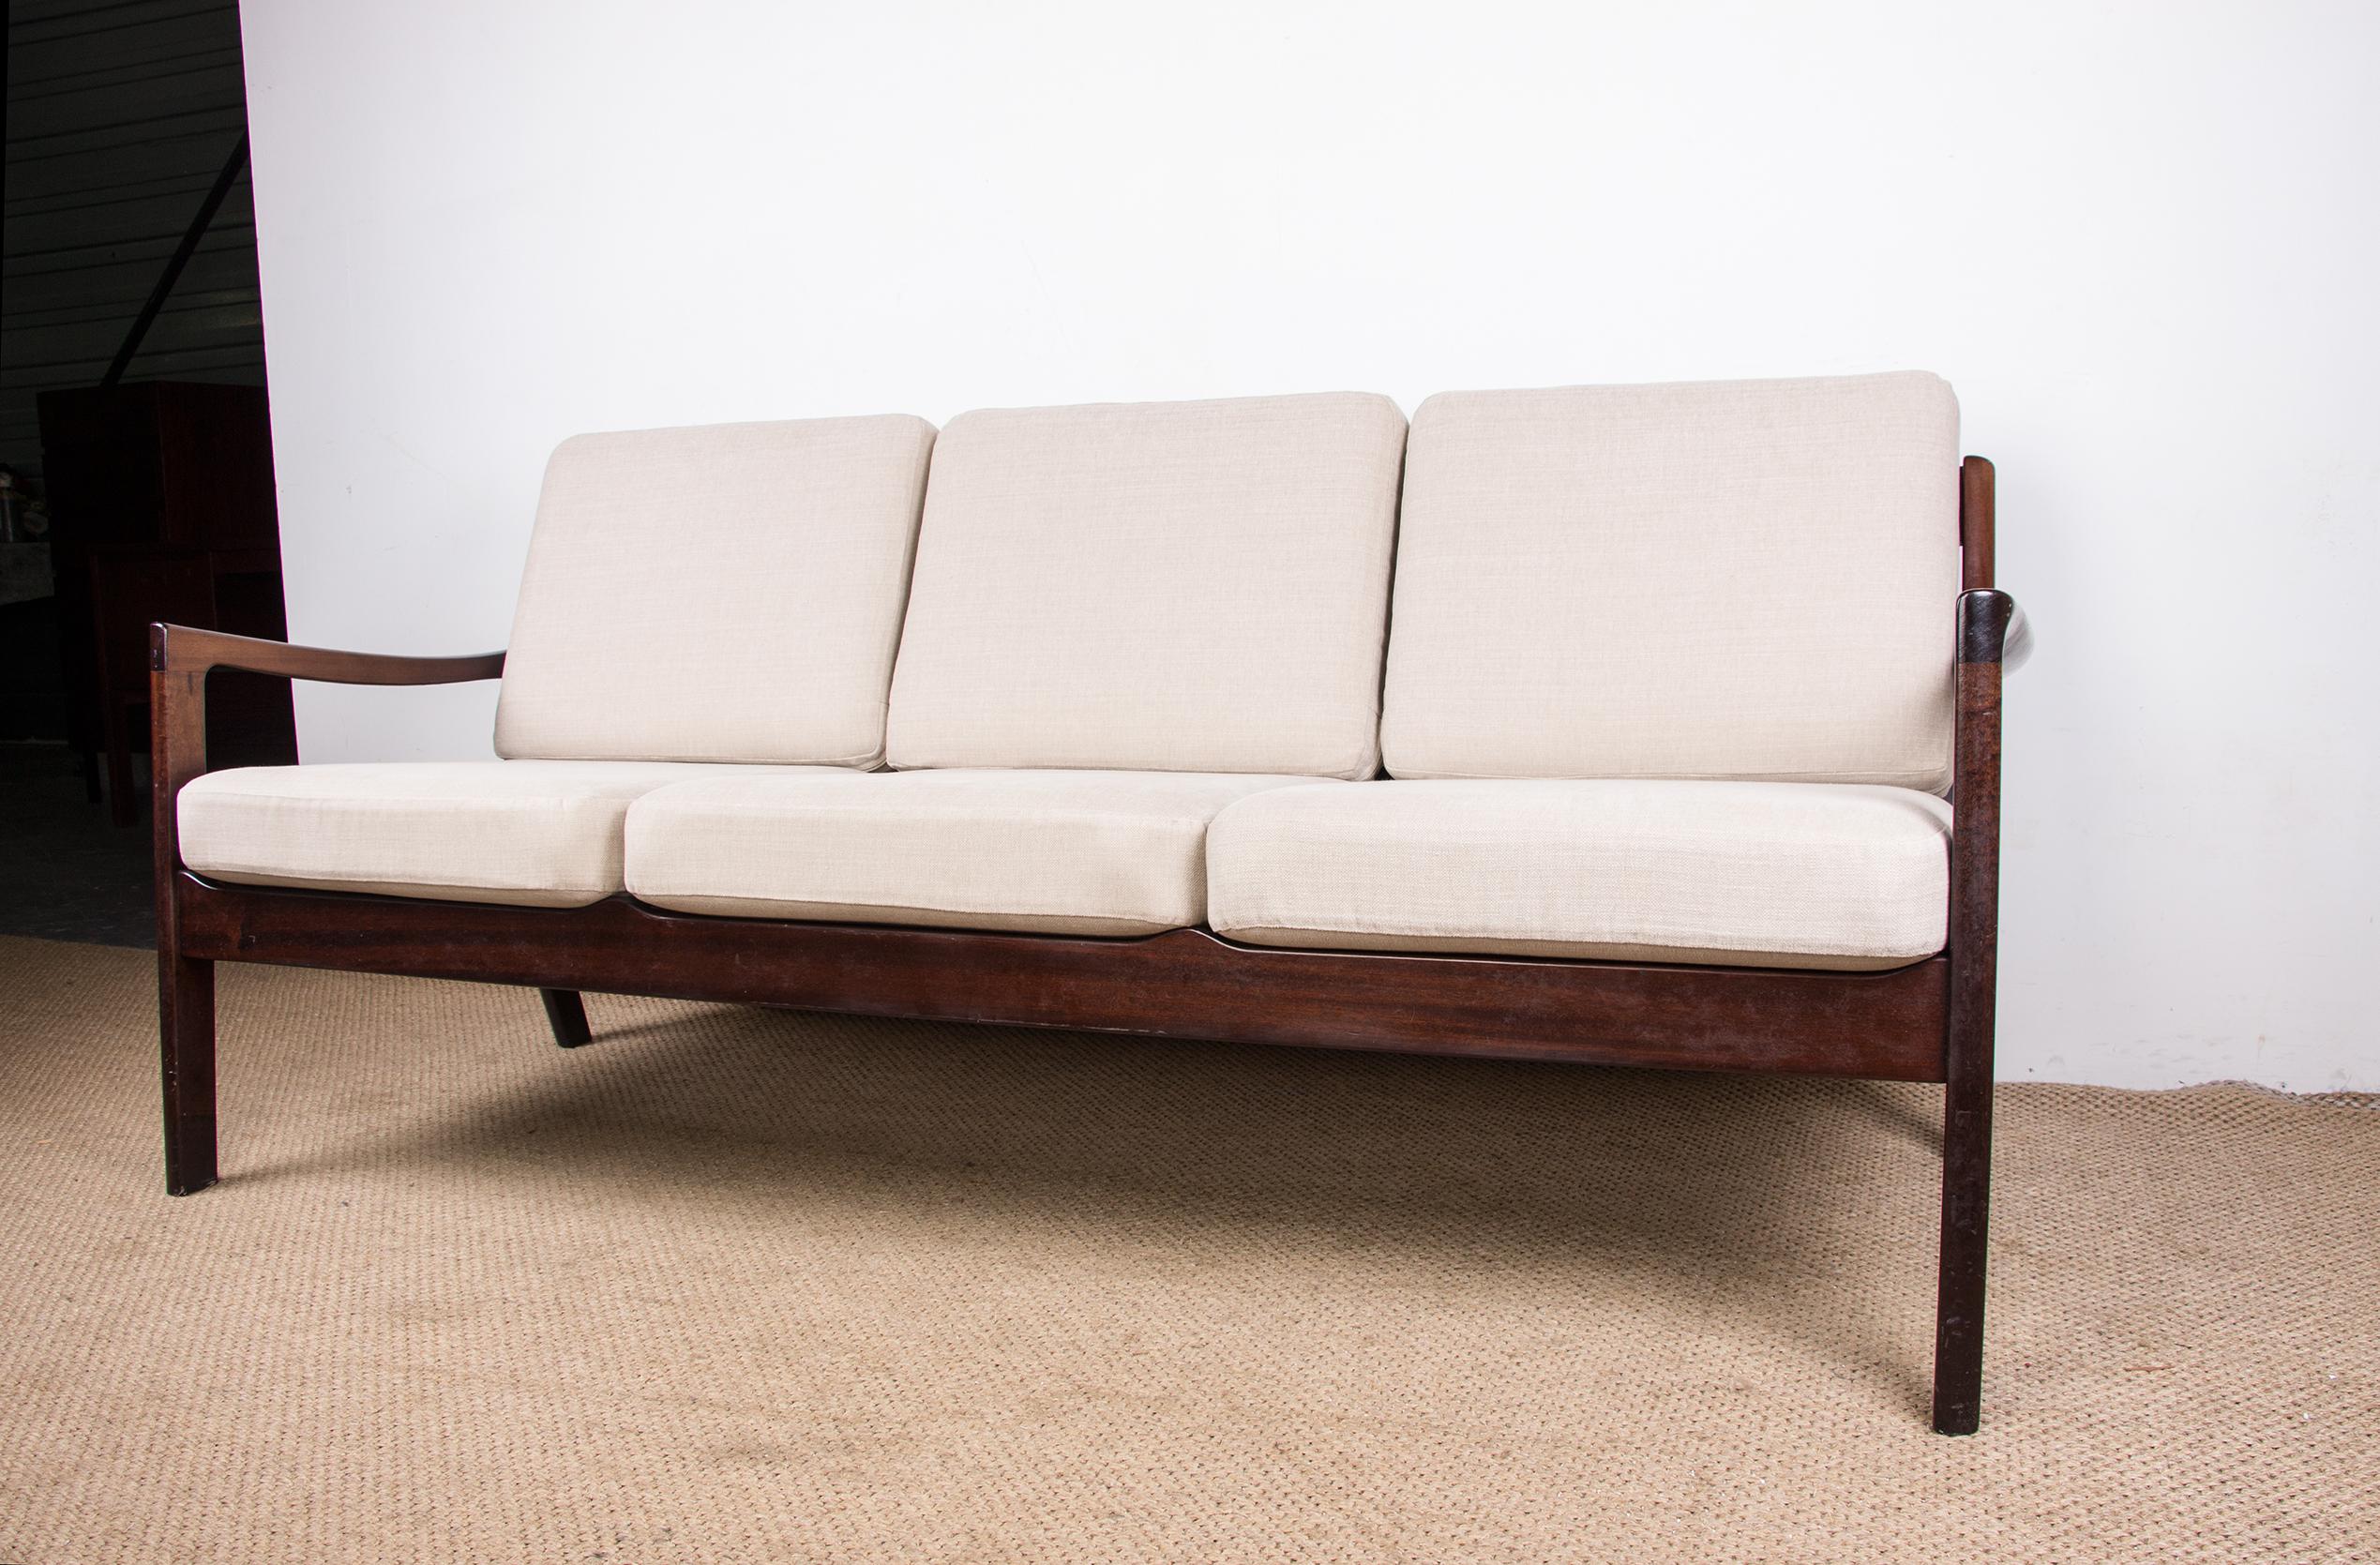 Mid-20th Century Danish Sofa, 3 Seats, Senator Model in Mahogany and New Fabric by Ole Wanscher For Sale